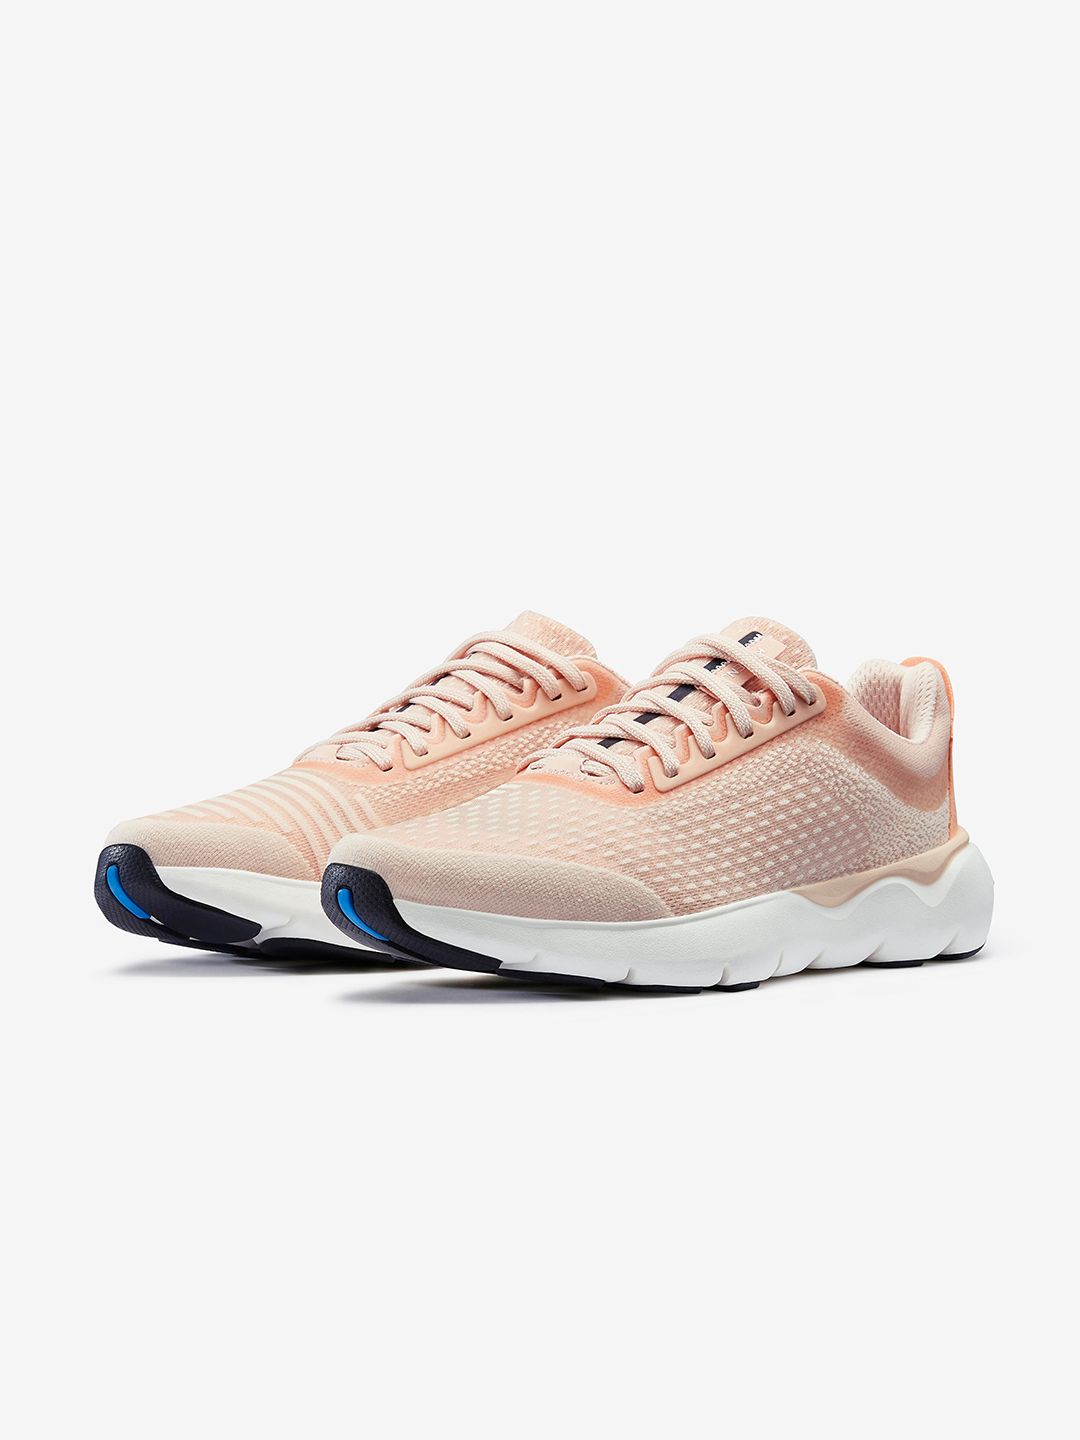 Kalenji By Decathlon Women Peach-Coloured Non-Marking Walking Shoes Price in India